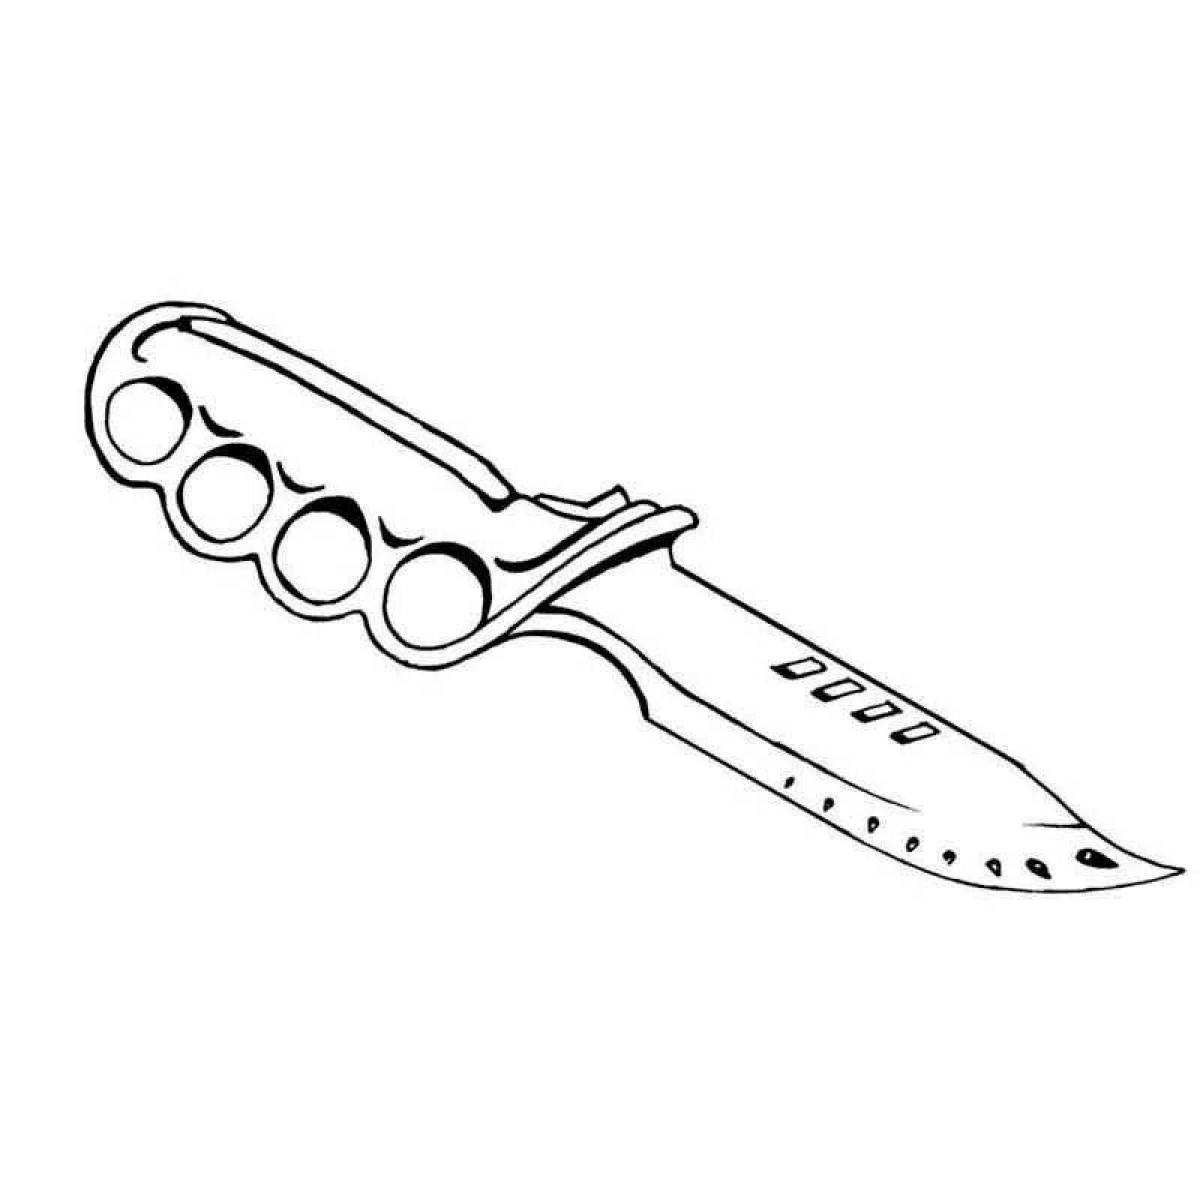 Dazzling coloring page stands 2 knives